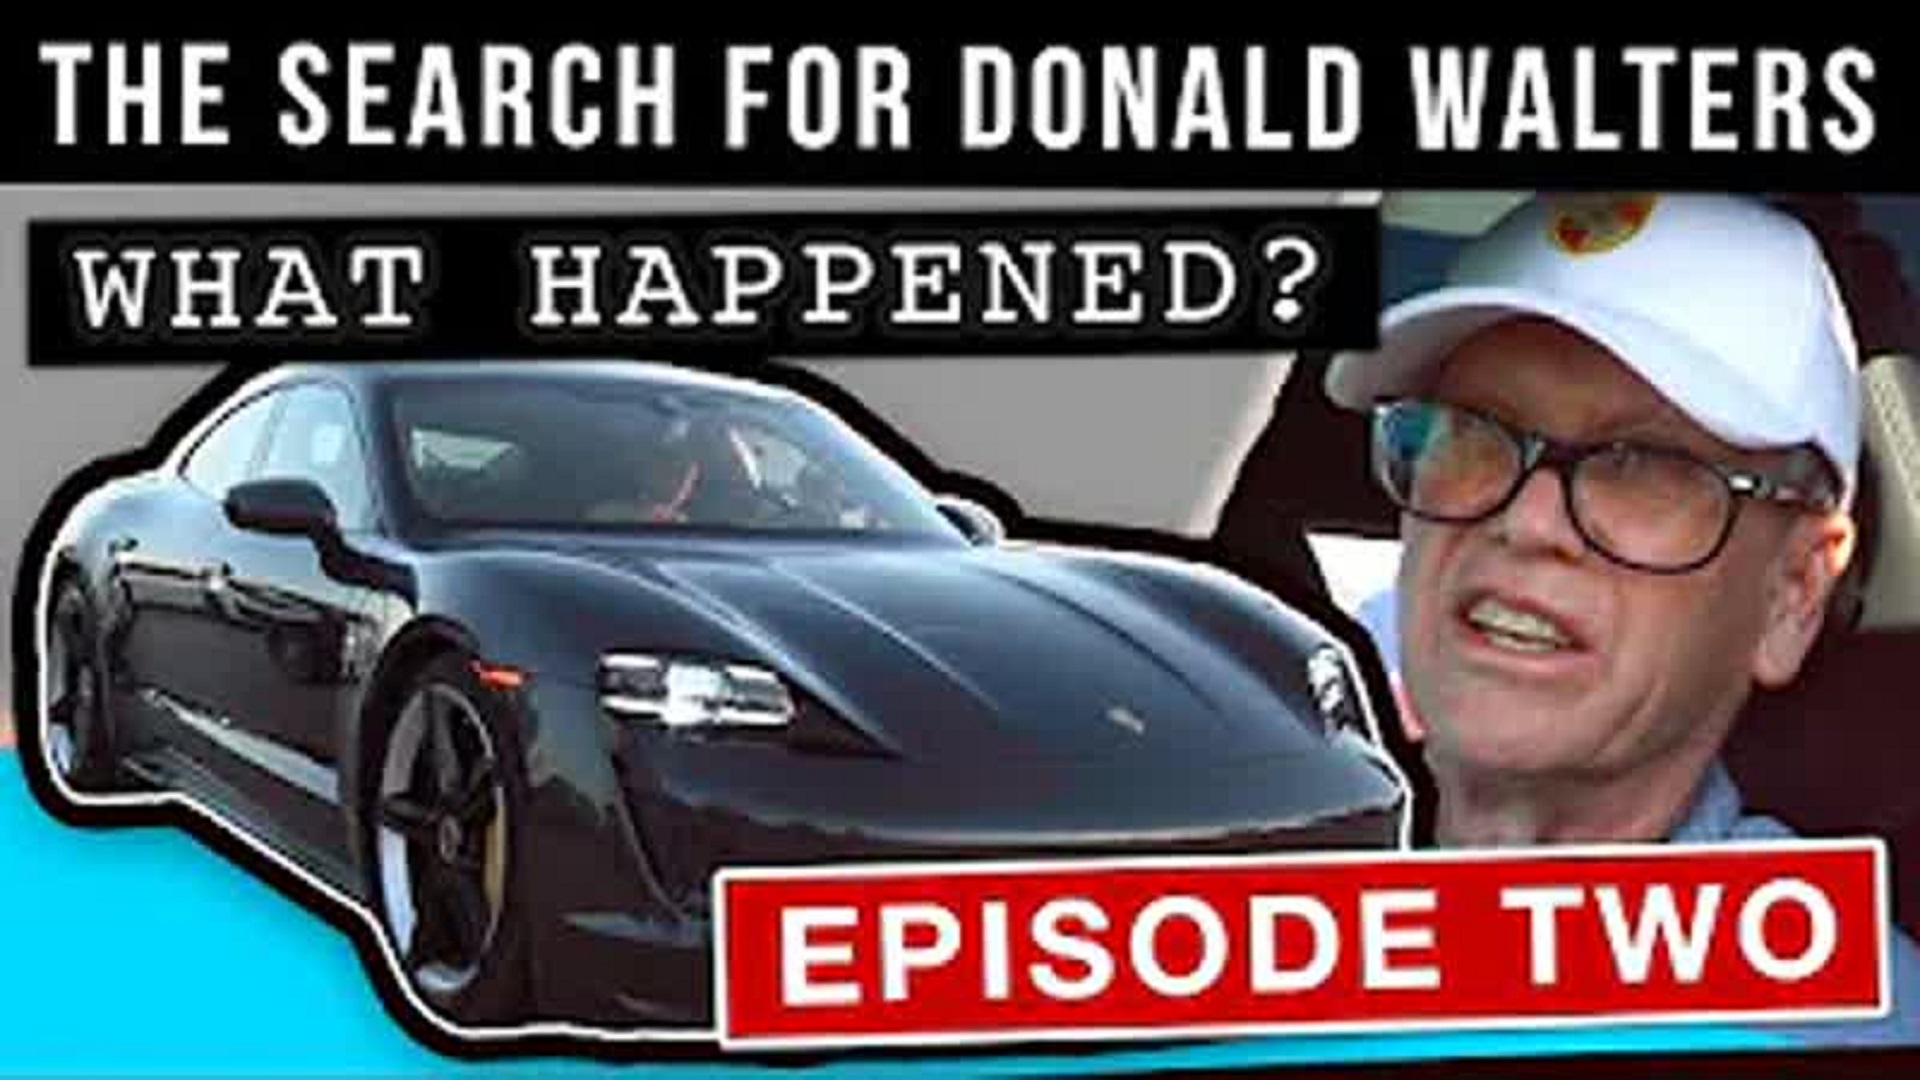 The Search for Donald Walters / Episode 2